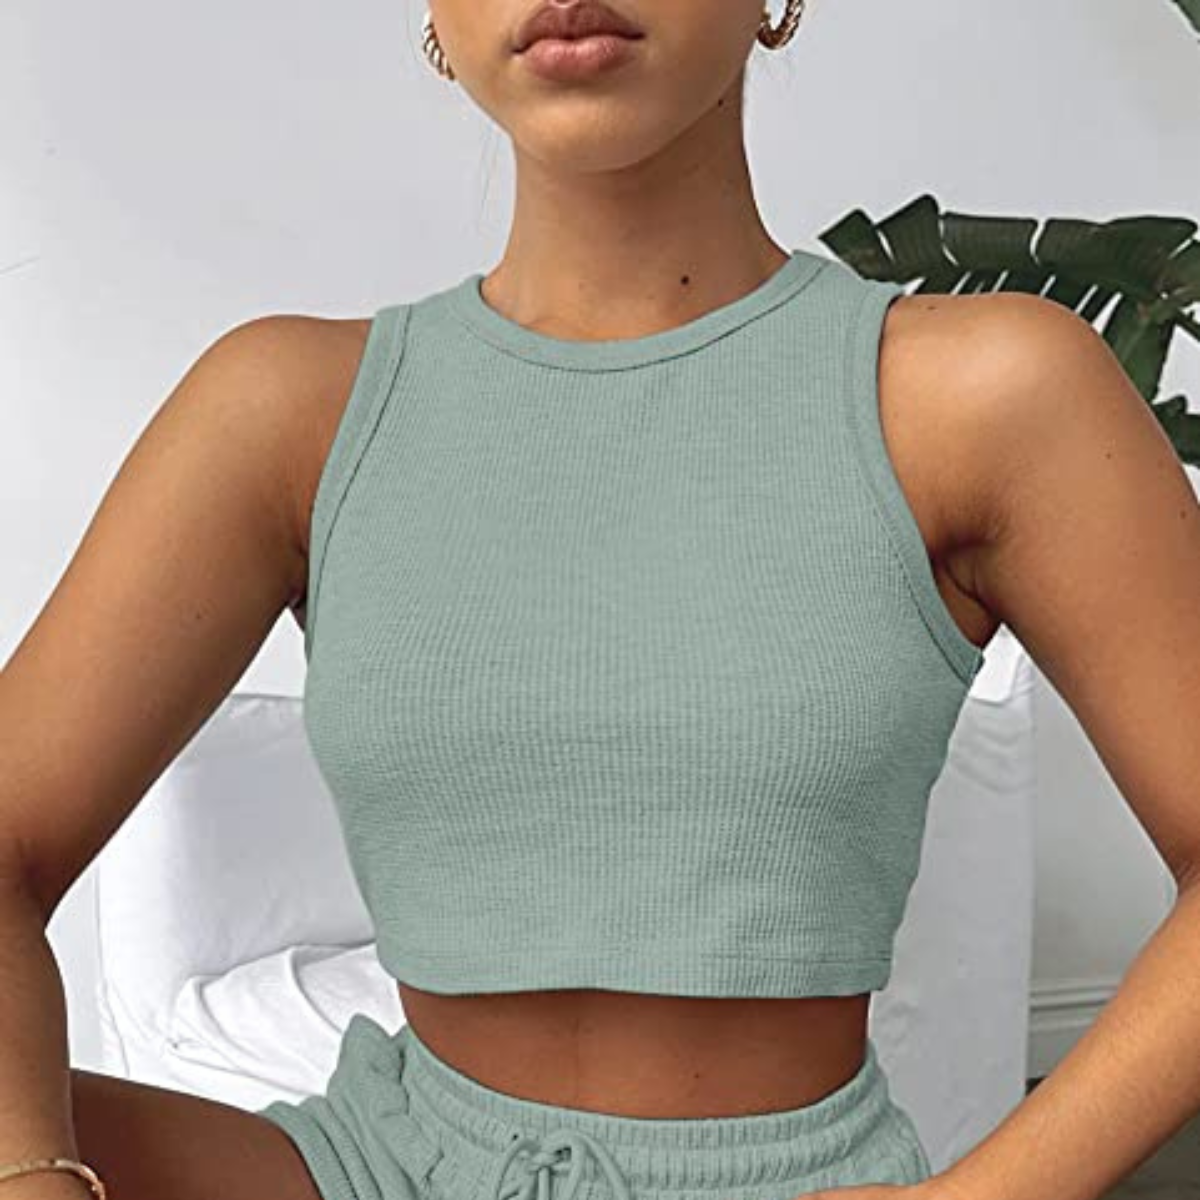 32 “Cool” Fashion Finds To Help You Survive The Last  Sweaty Girl Summer